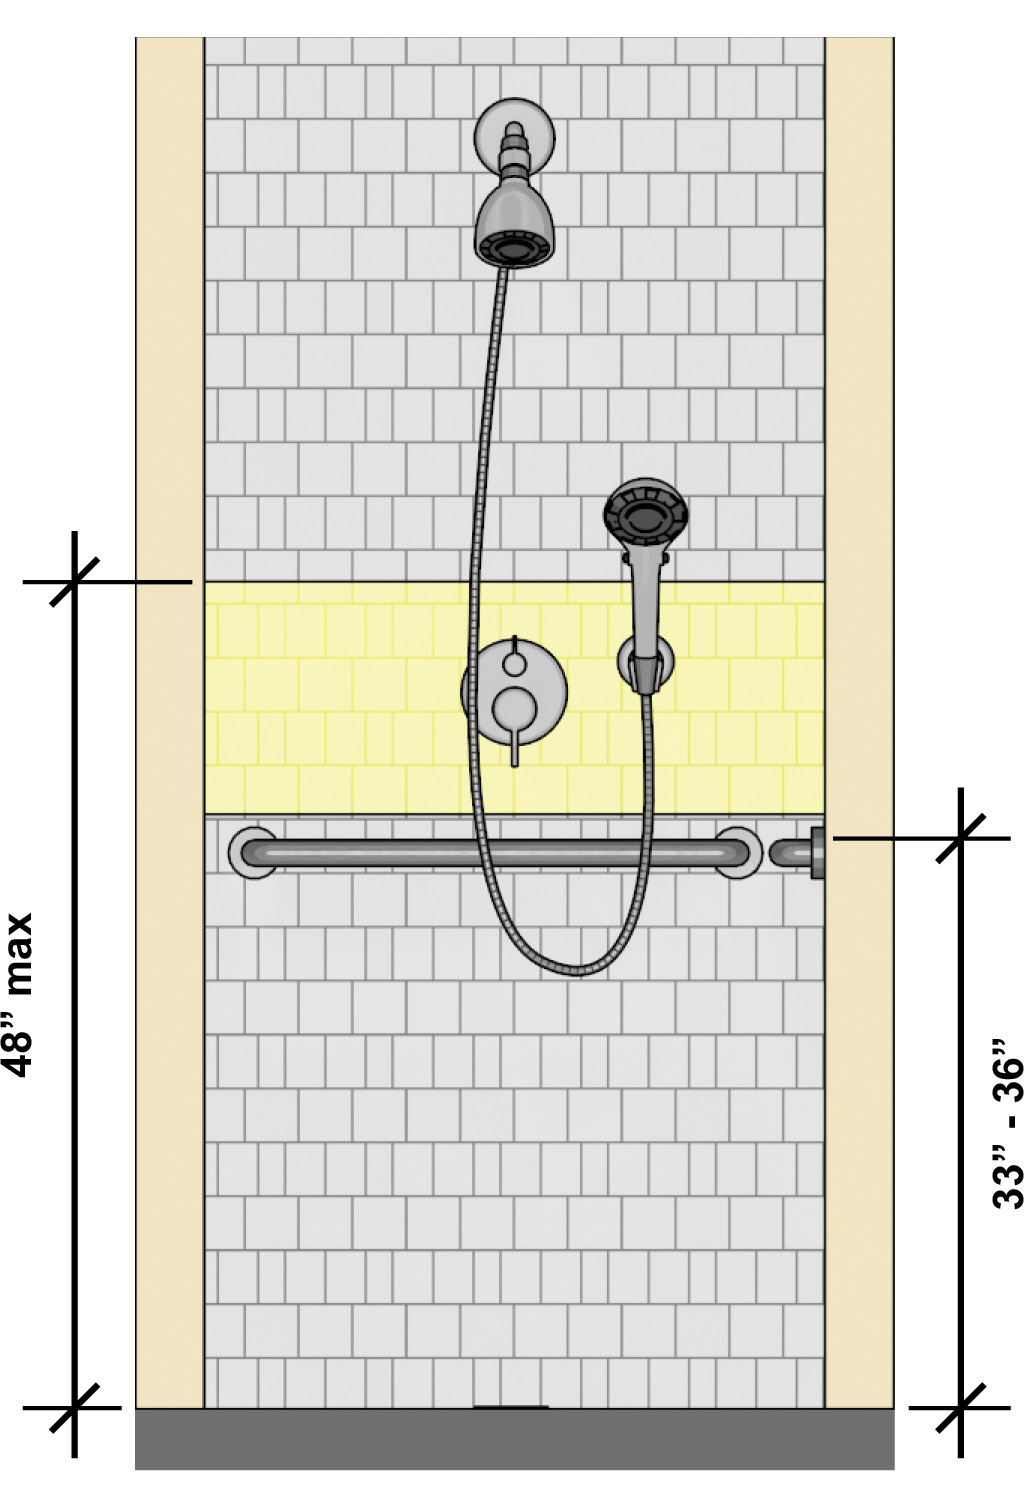 Elevation of side wall shows controls and shower spray unit located
above the grab bar and below a max. height of 48". The grab bar is 33"
to 36" high measured to the top of the gripping
surface.